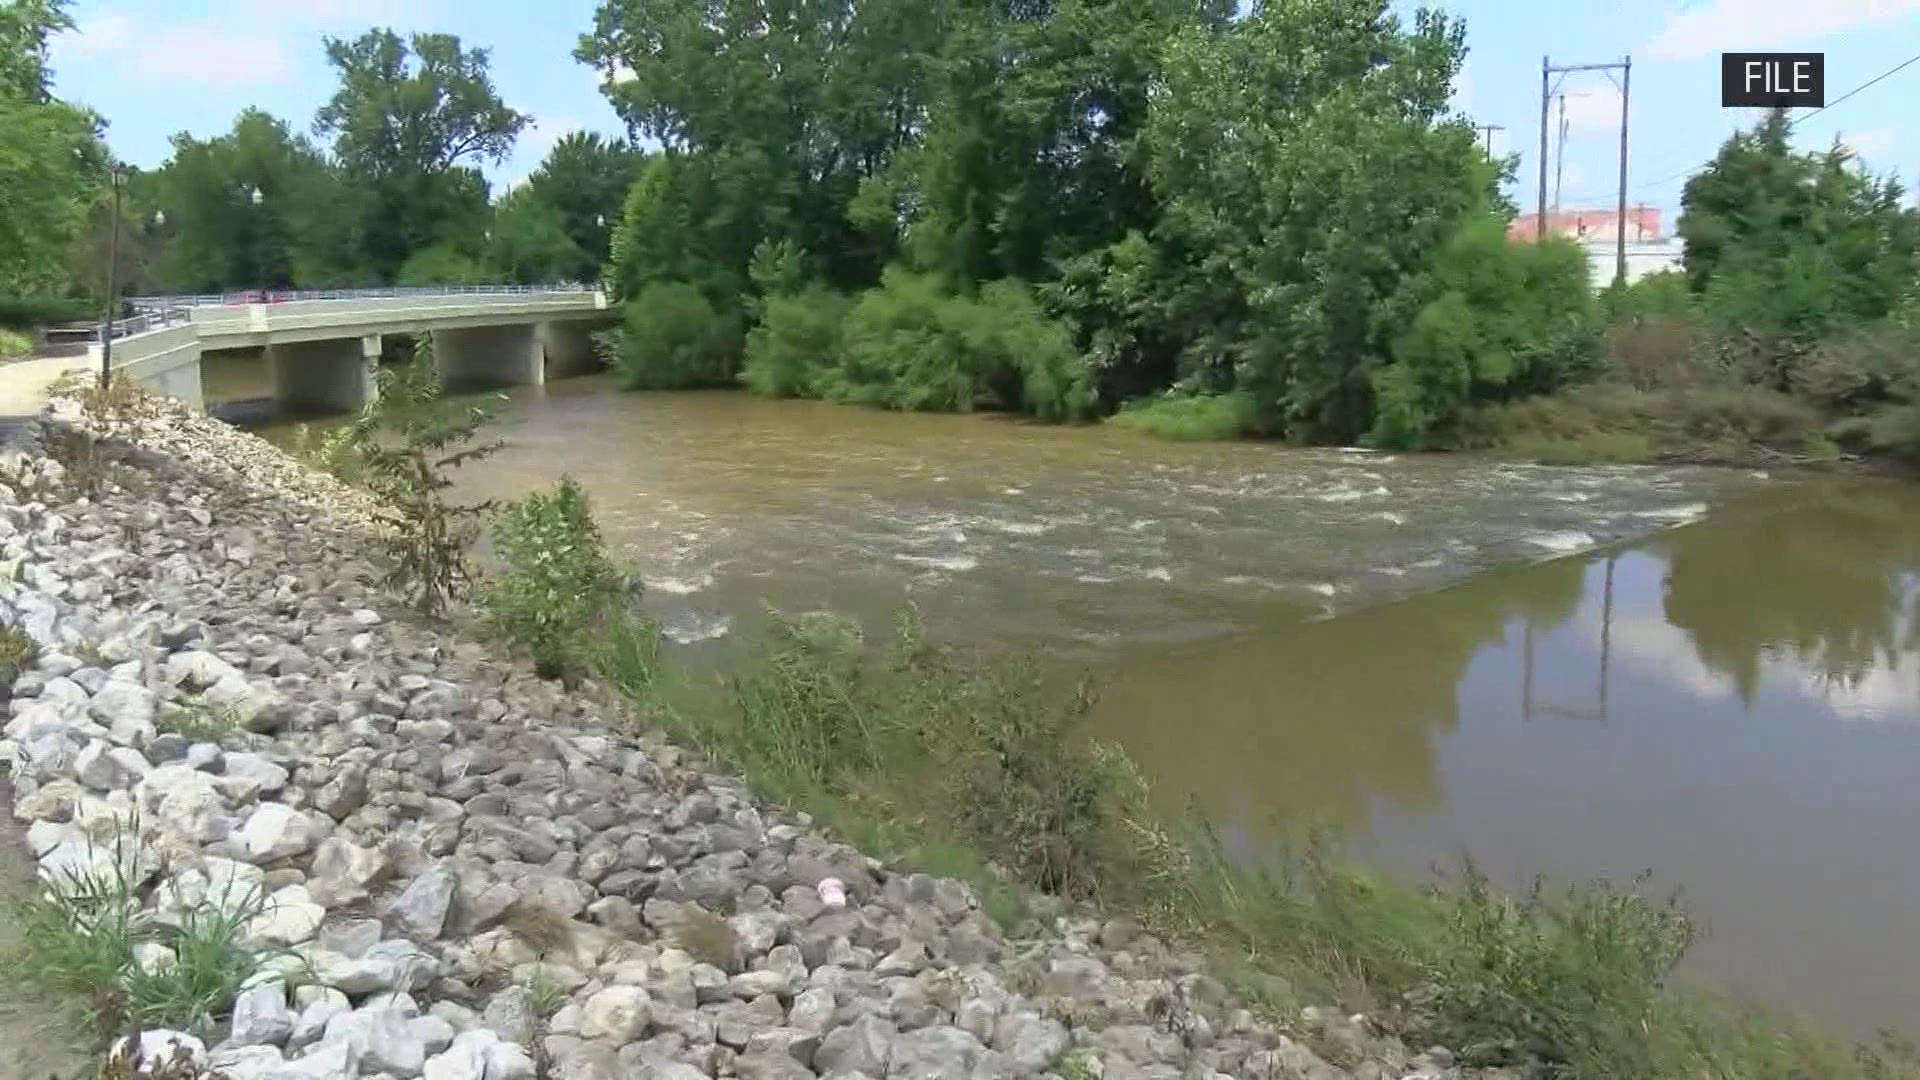 Flood levels were adjusted after just one benching project, and officials believe levels will be adjusted again with two more flood mitigation projects in the works.